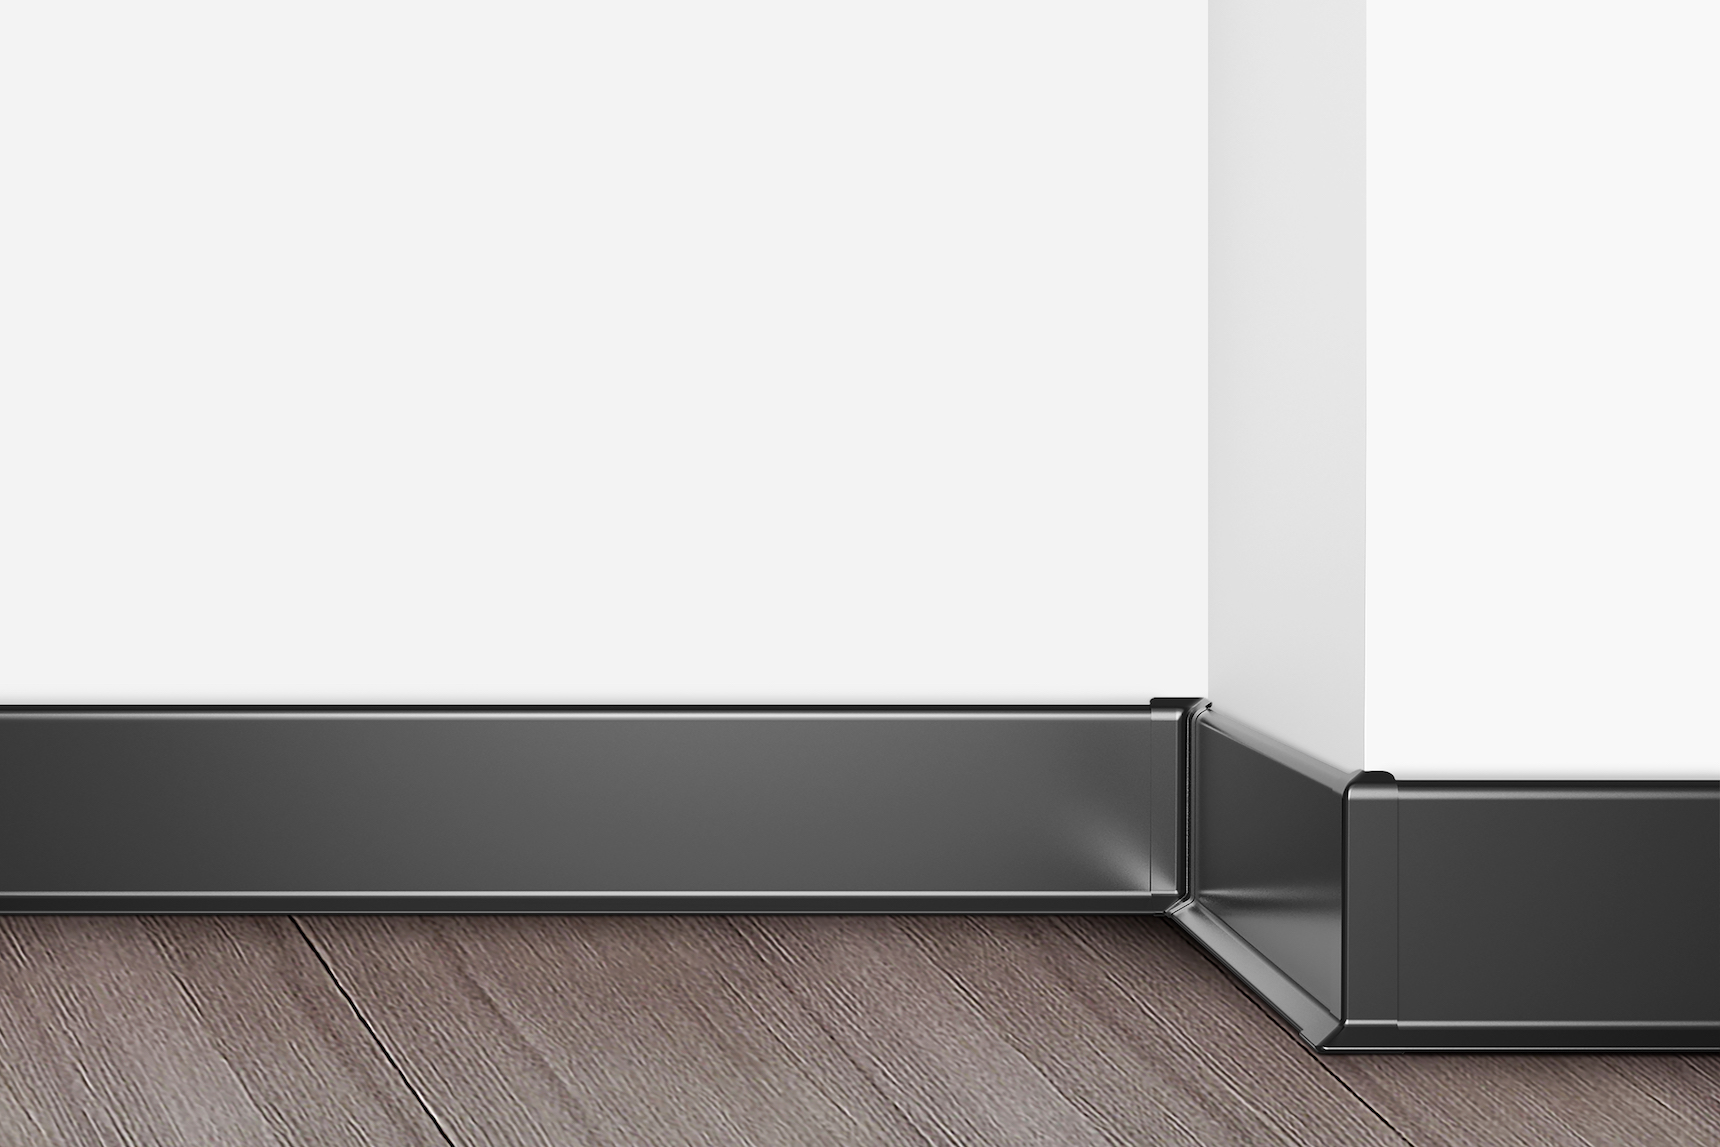 MUSE Design Winners - A Magnetic Baseboard for Easy Installation